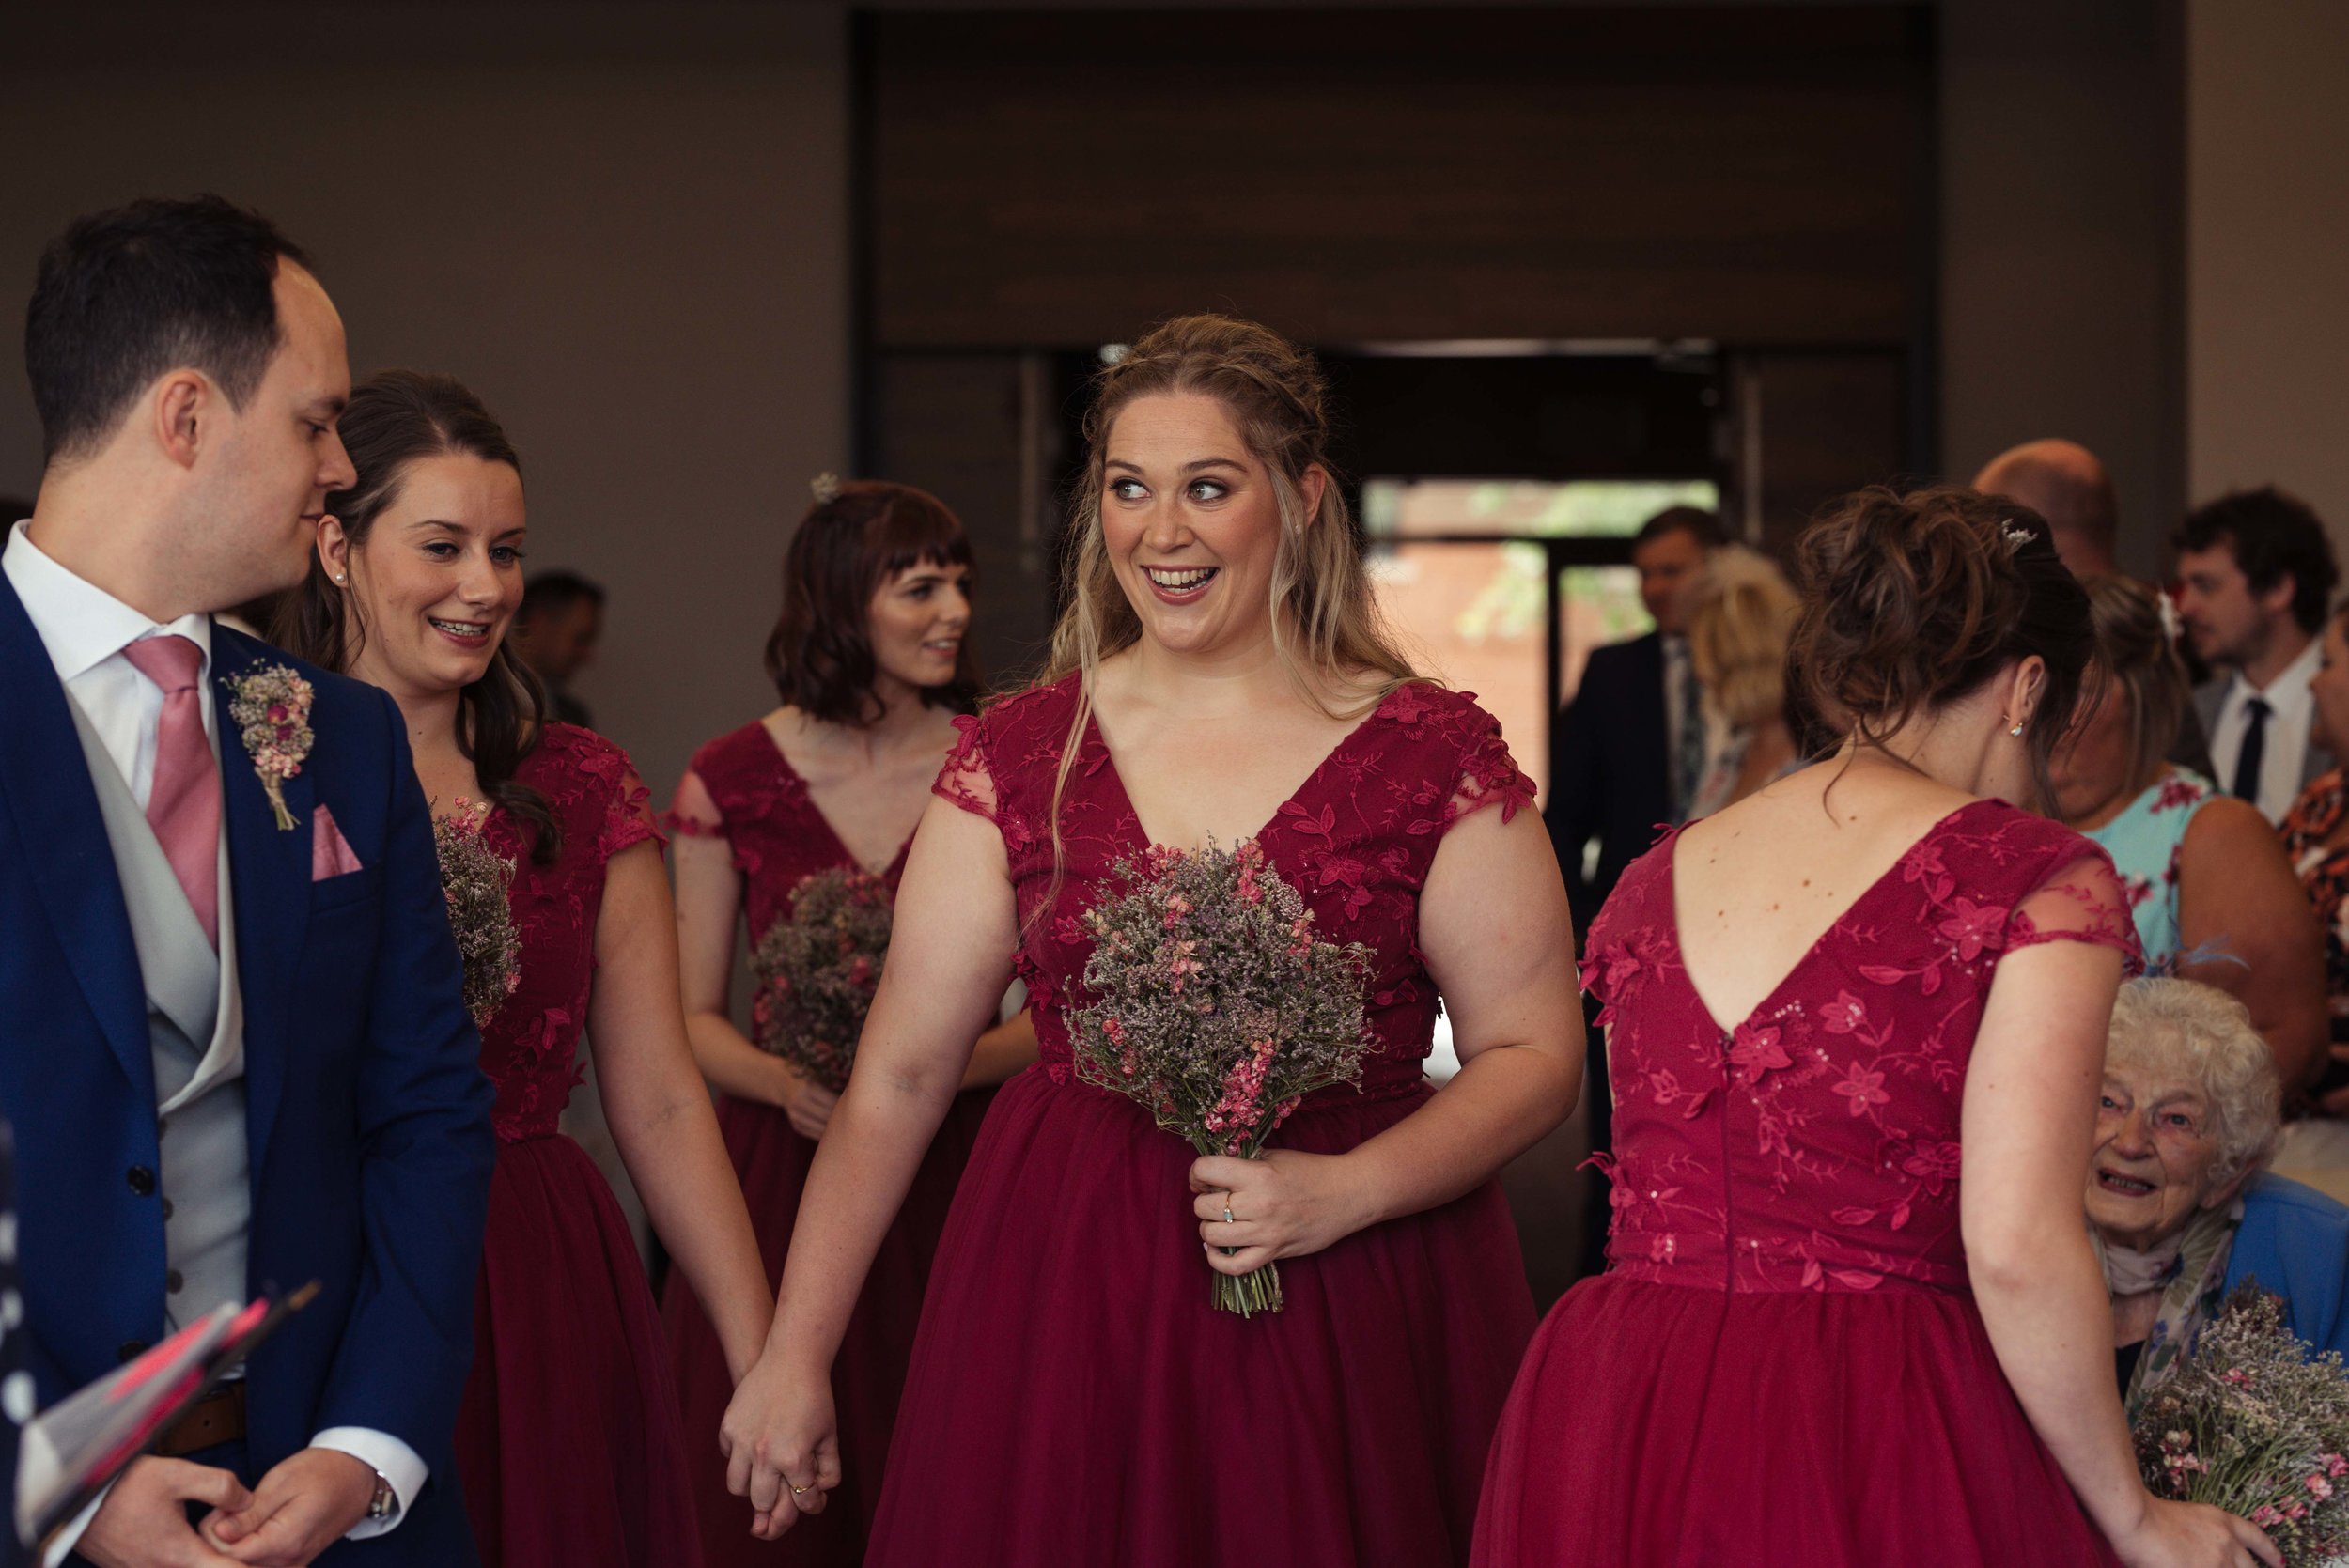 A happy bridesmaid walking up the aisle at the start of the wedding ceremony